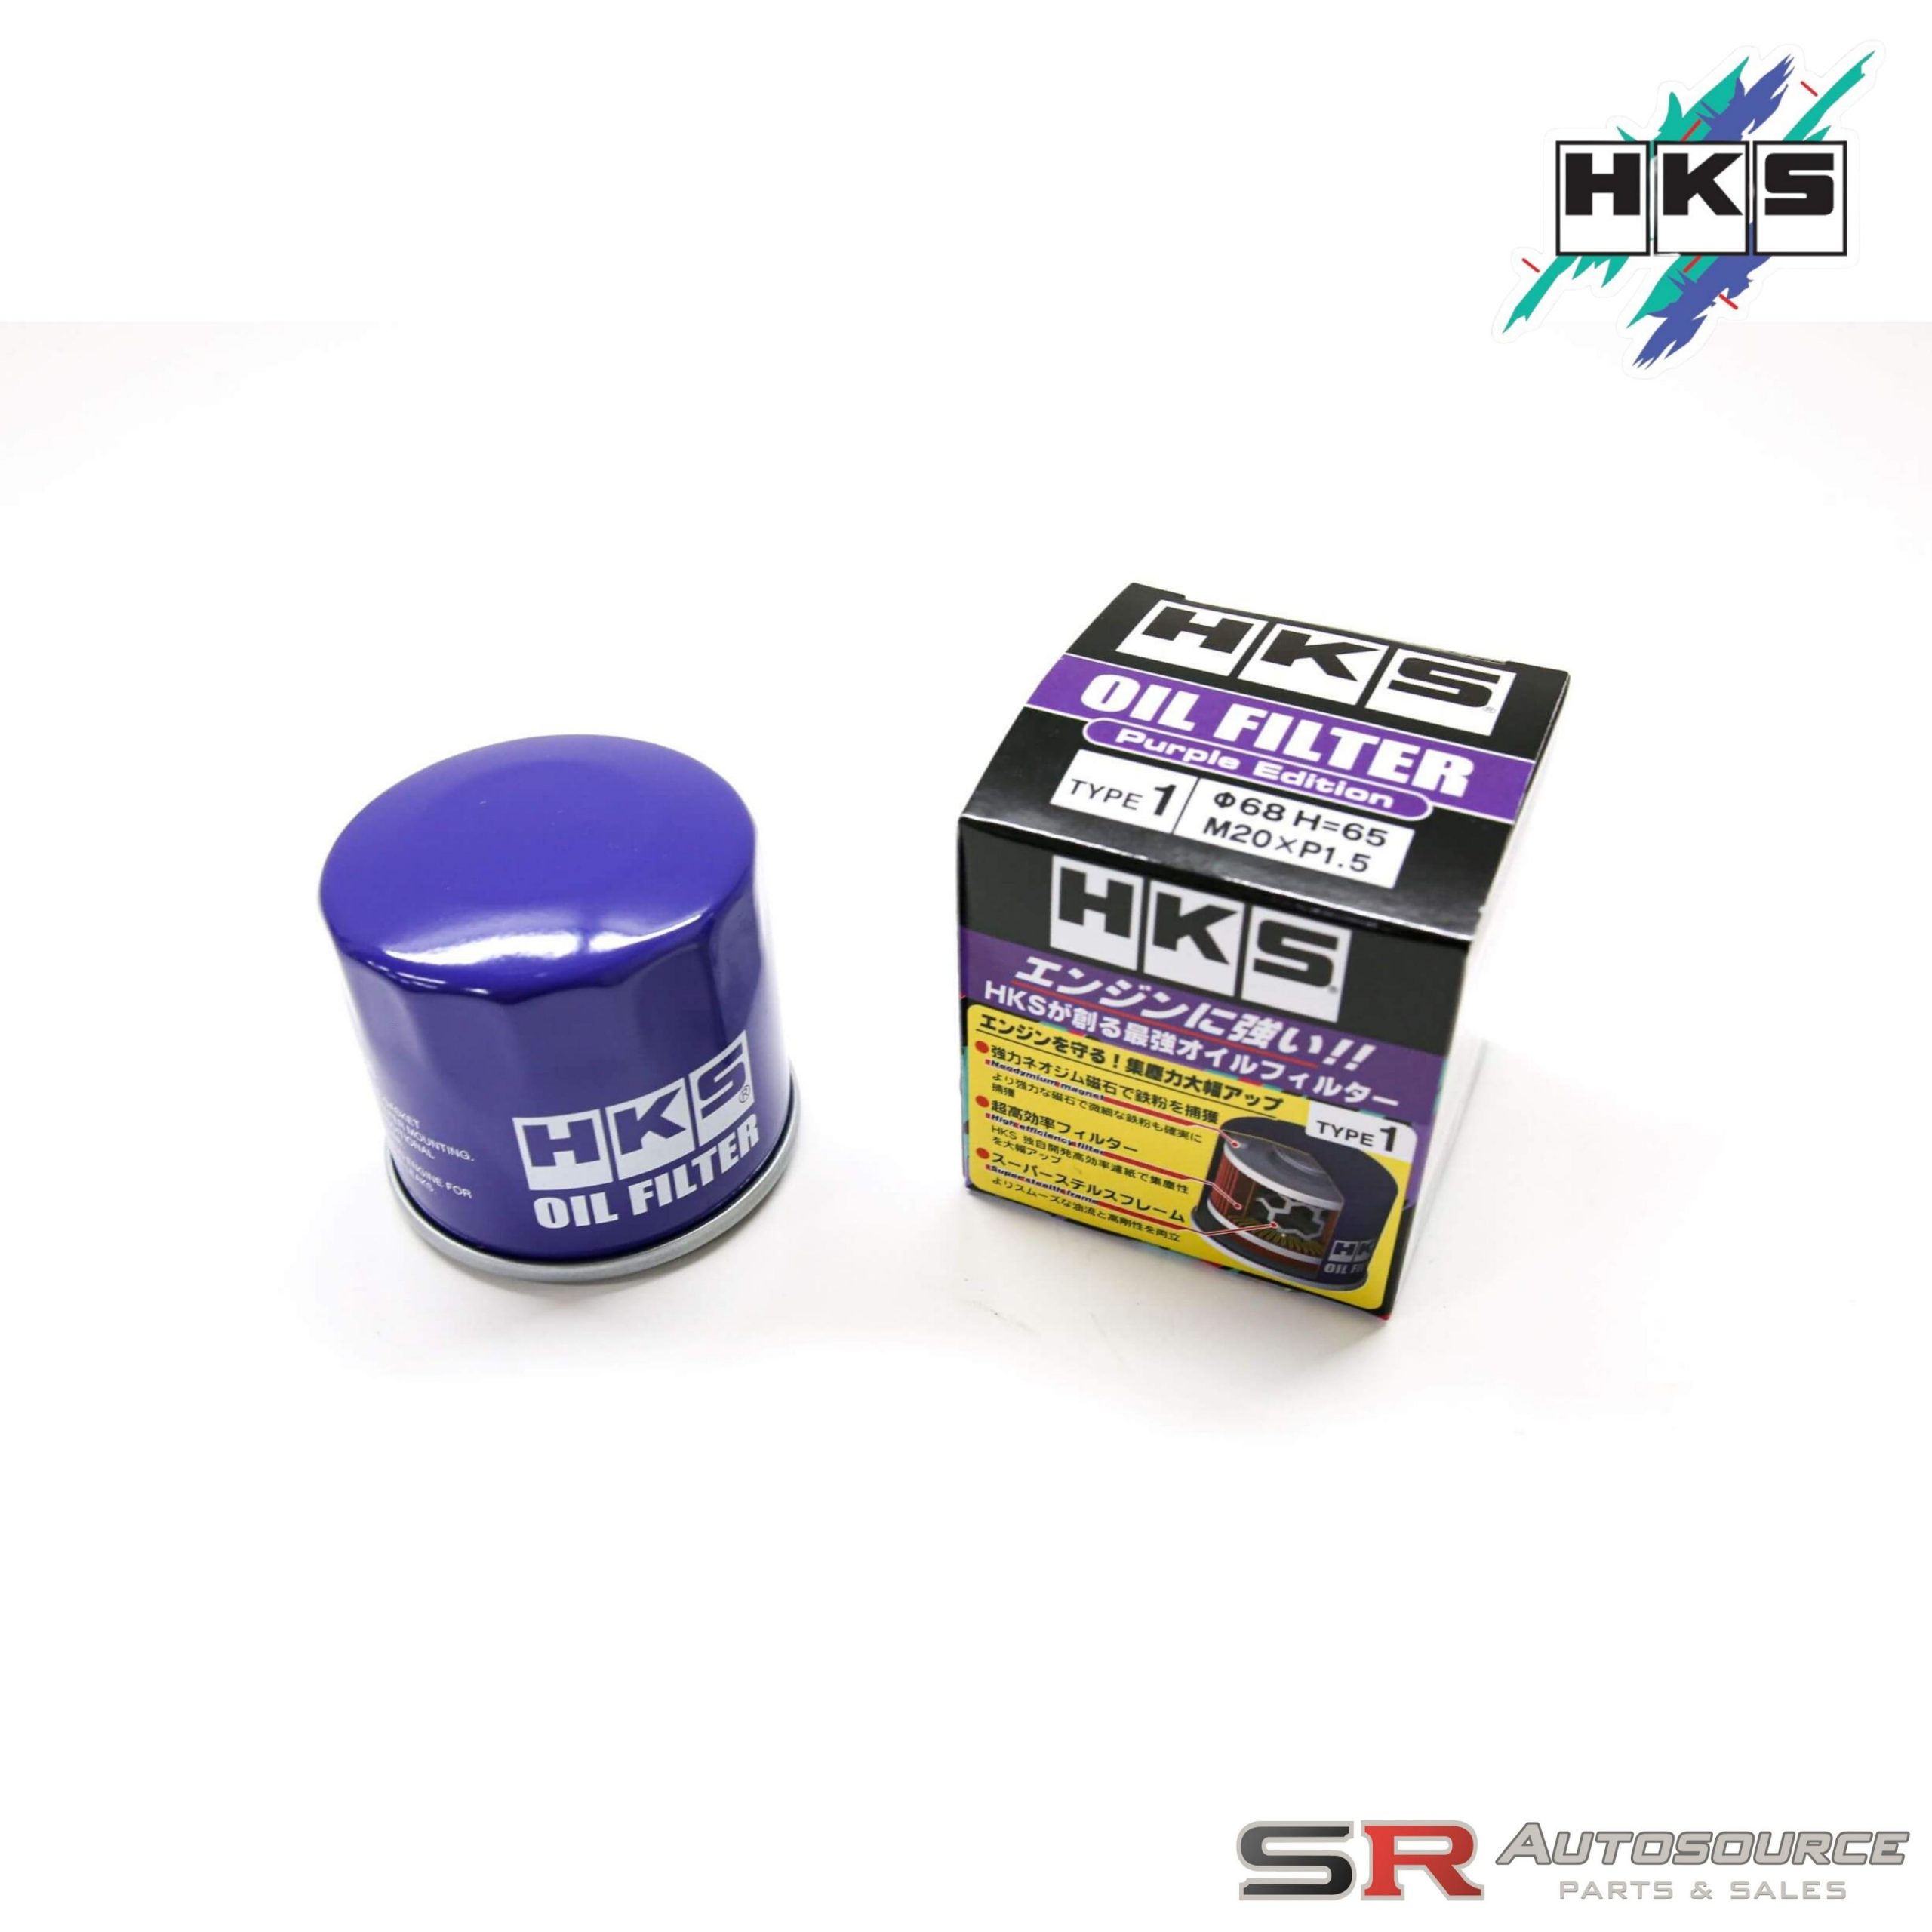 HKS Purple Oil Filter for Skyline R32/R33/R34 and S13 Silvia/180SX